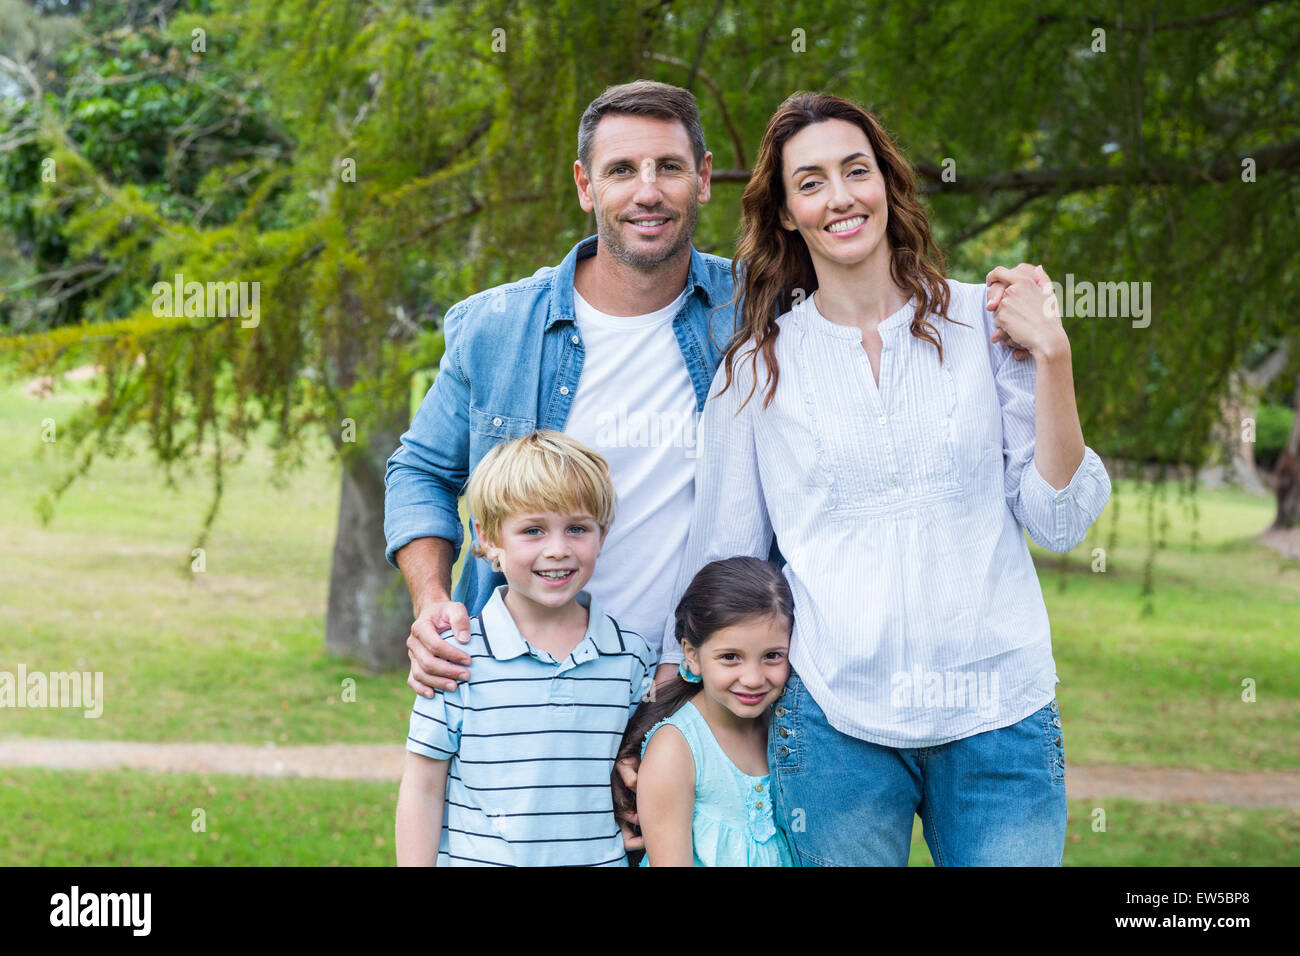 Happy family in the park together Stock Photo